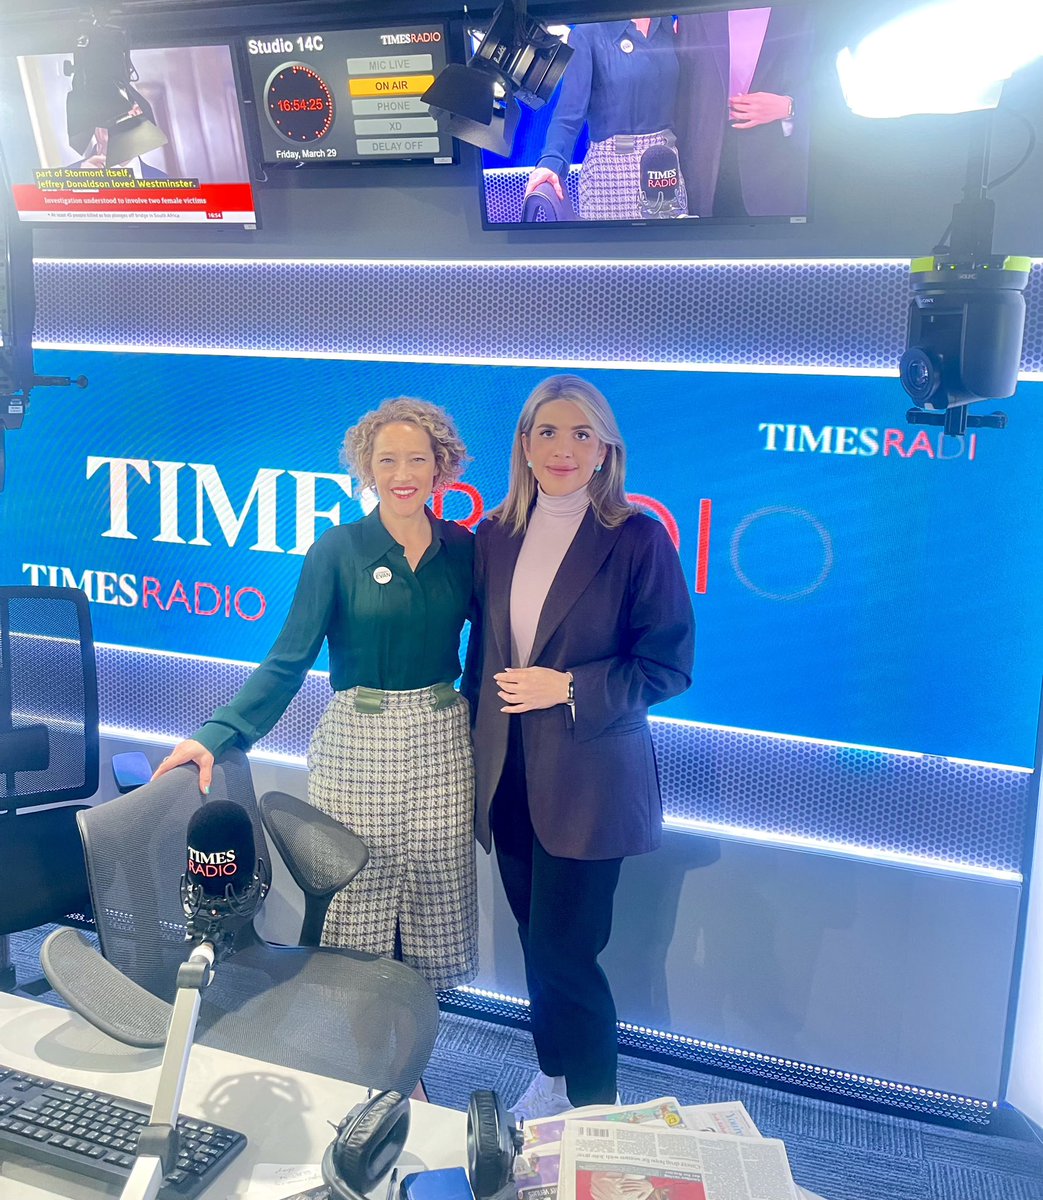 Making russia pay is a fair and logical way to bring justice and peace. Excited to be on the same page with our British allies. Thank you for keeping the focus on Ukraine! @TimesRadio, @cathynewman